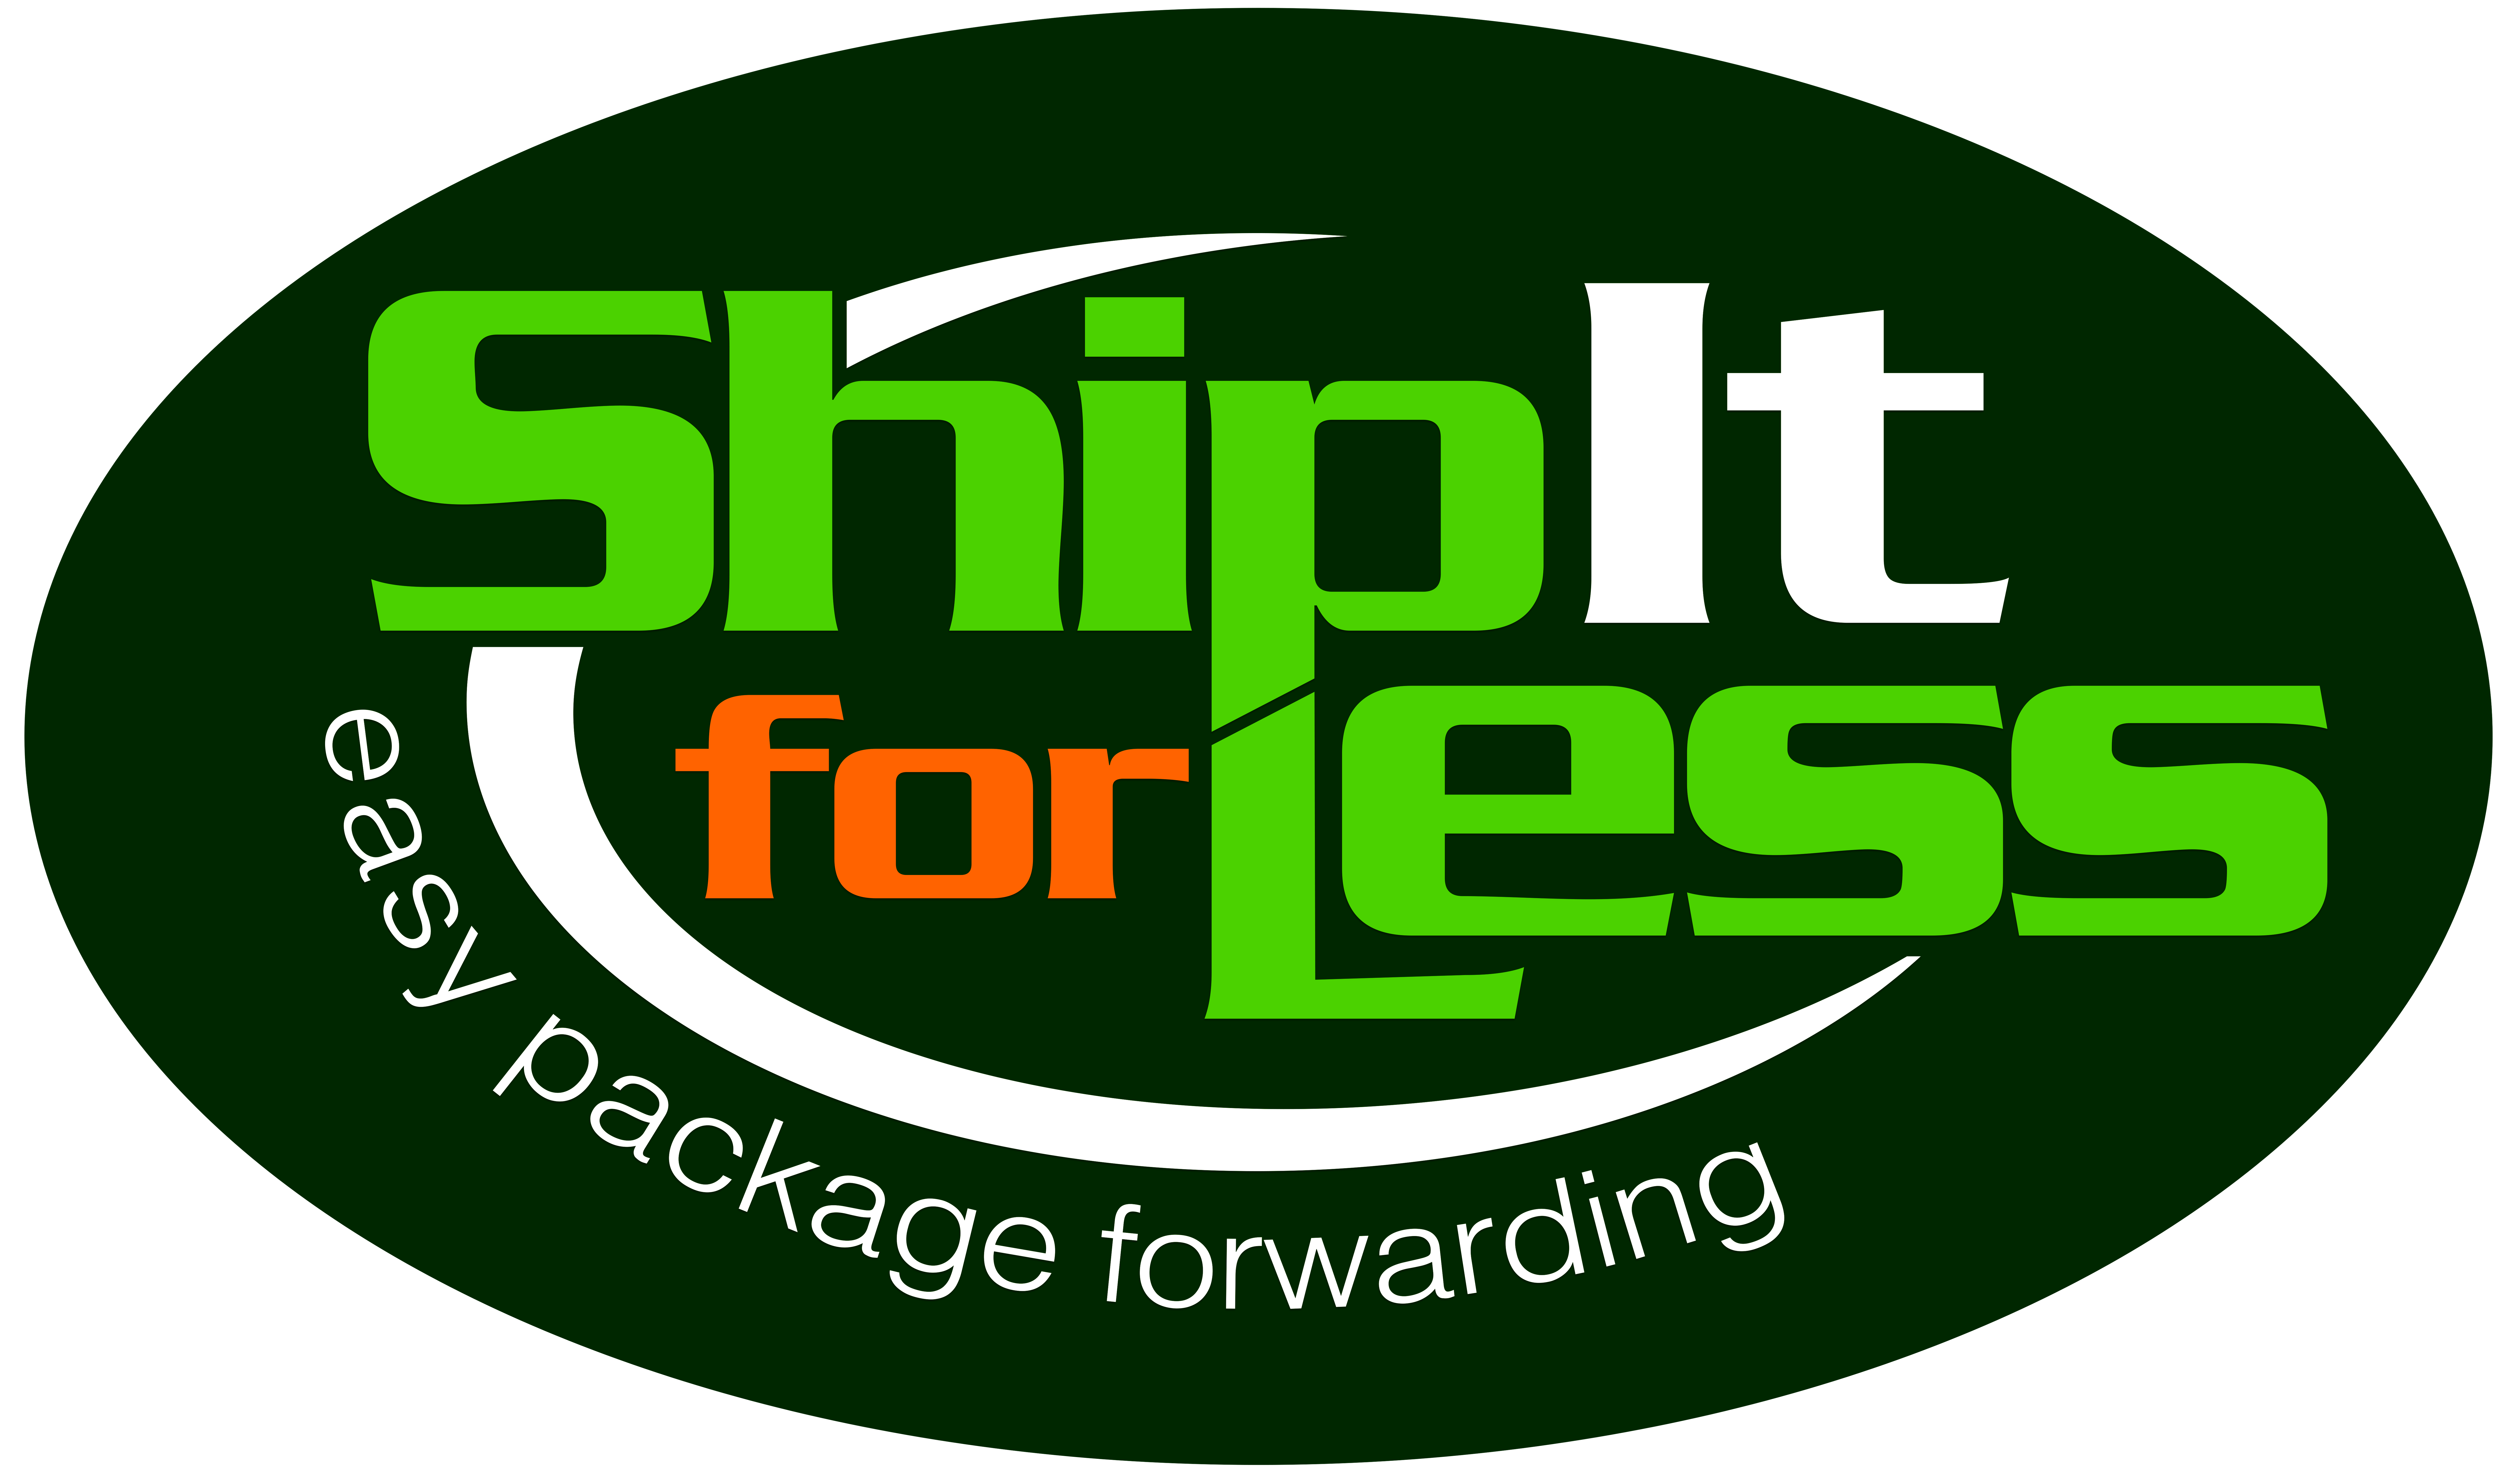 Shipit For Less